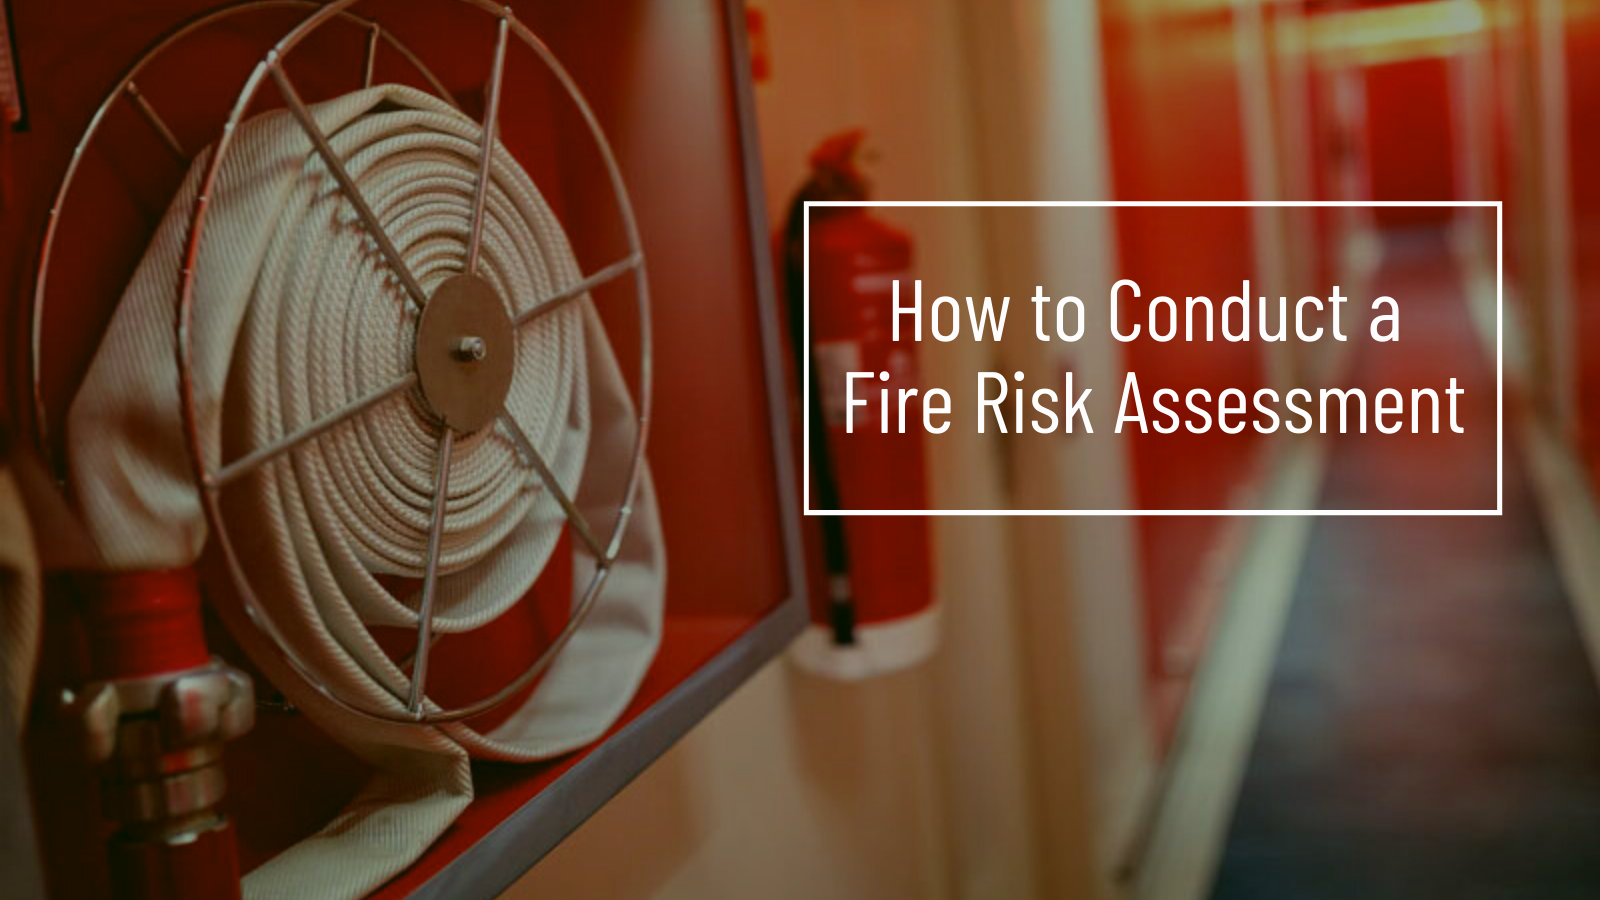 How to Conduct a Fire Risk Assessment